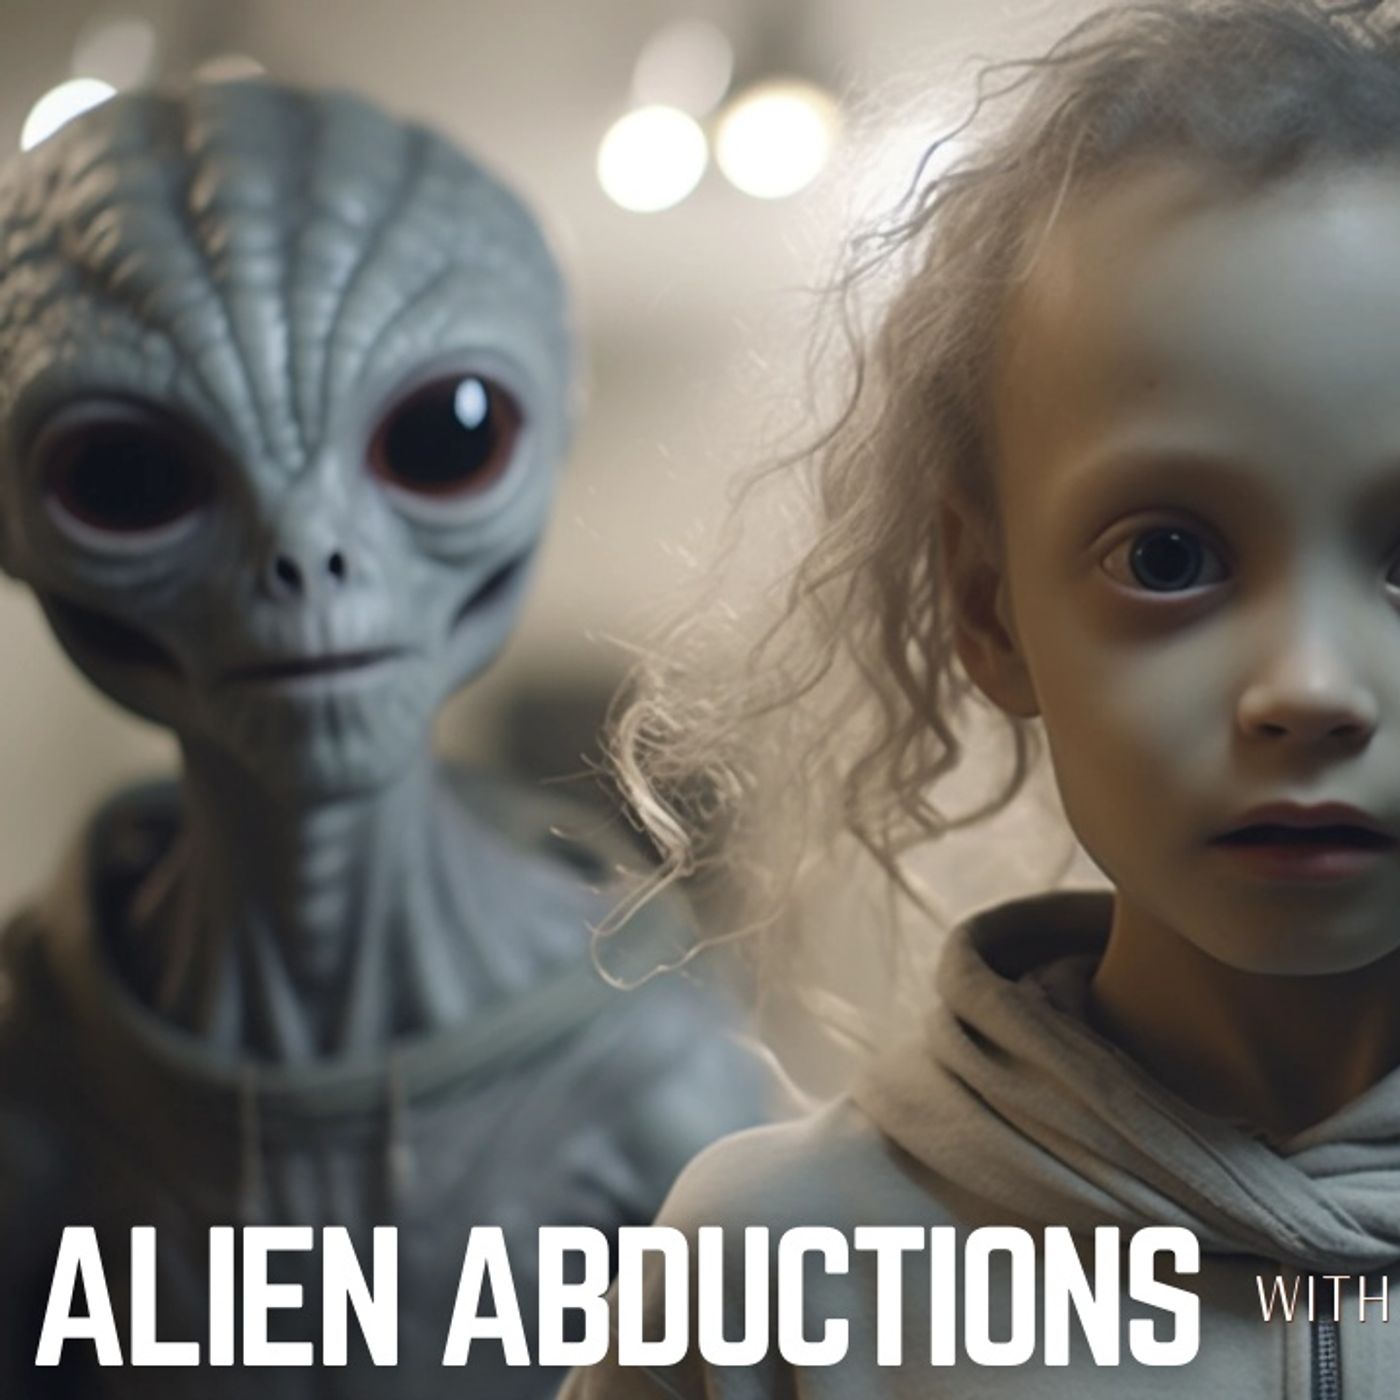 He Was Abducted By Aliens, Then They Started To Visit Him In Strange Ways | Michael Kameron